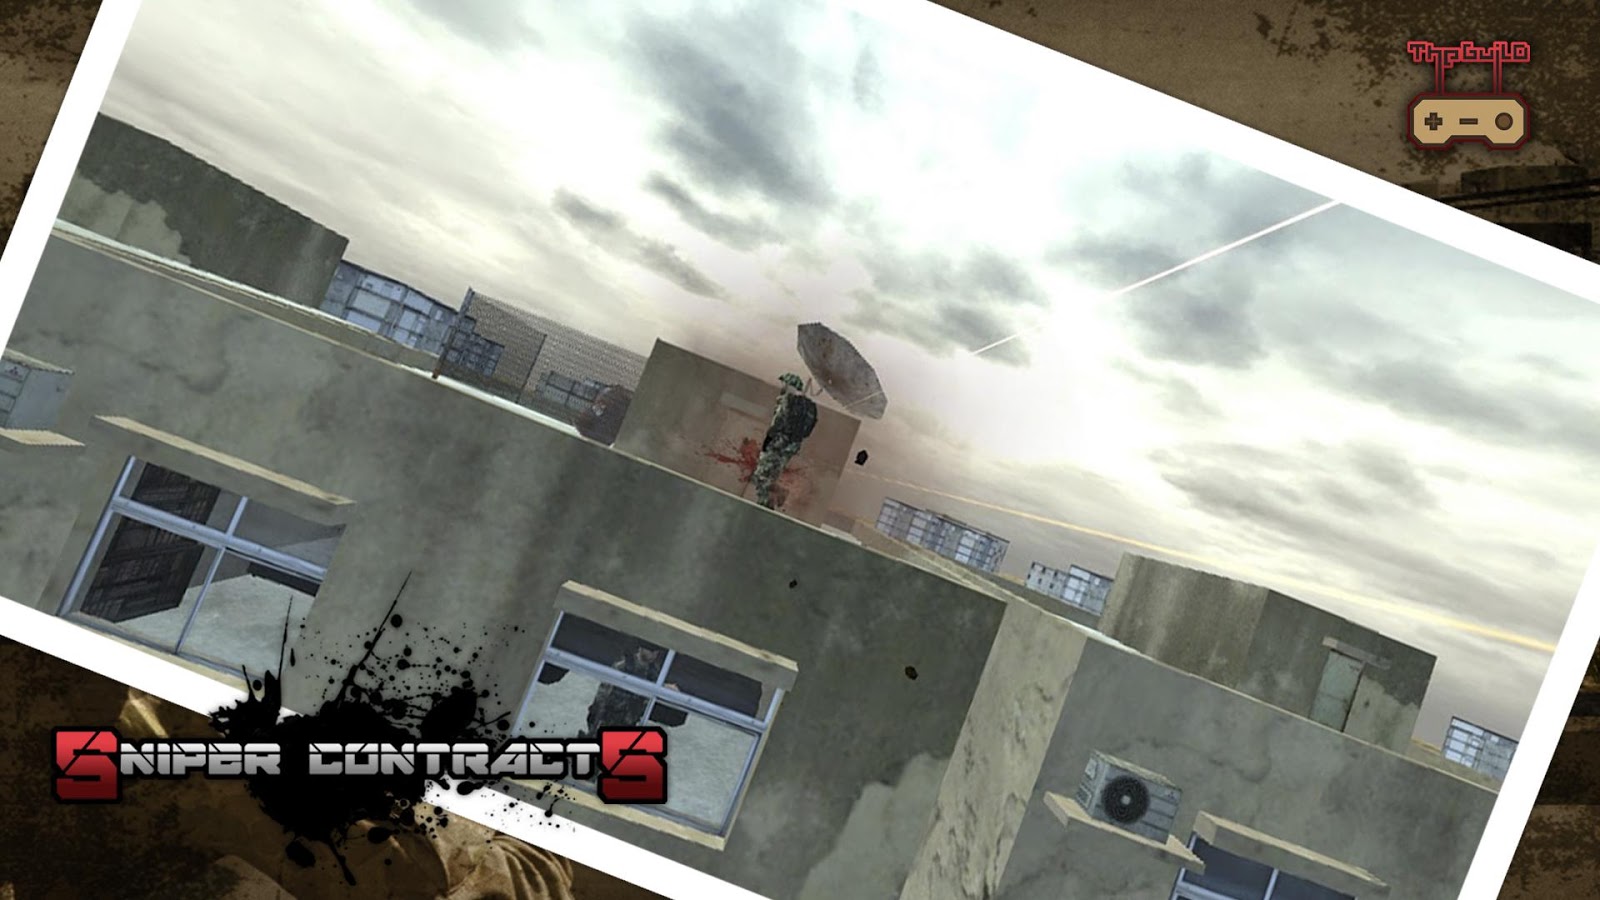 sniper contracts 3 download